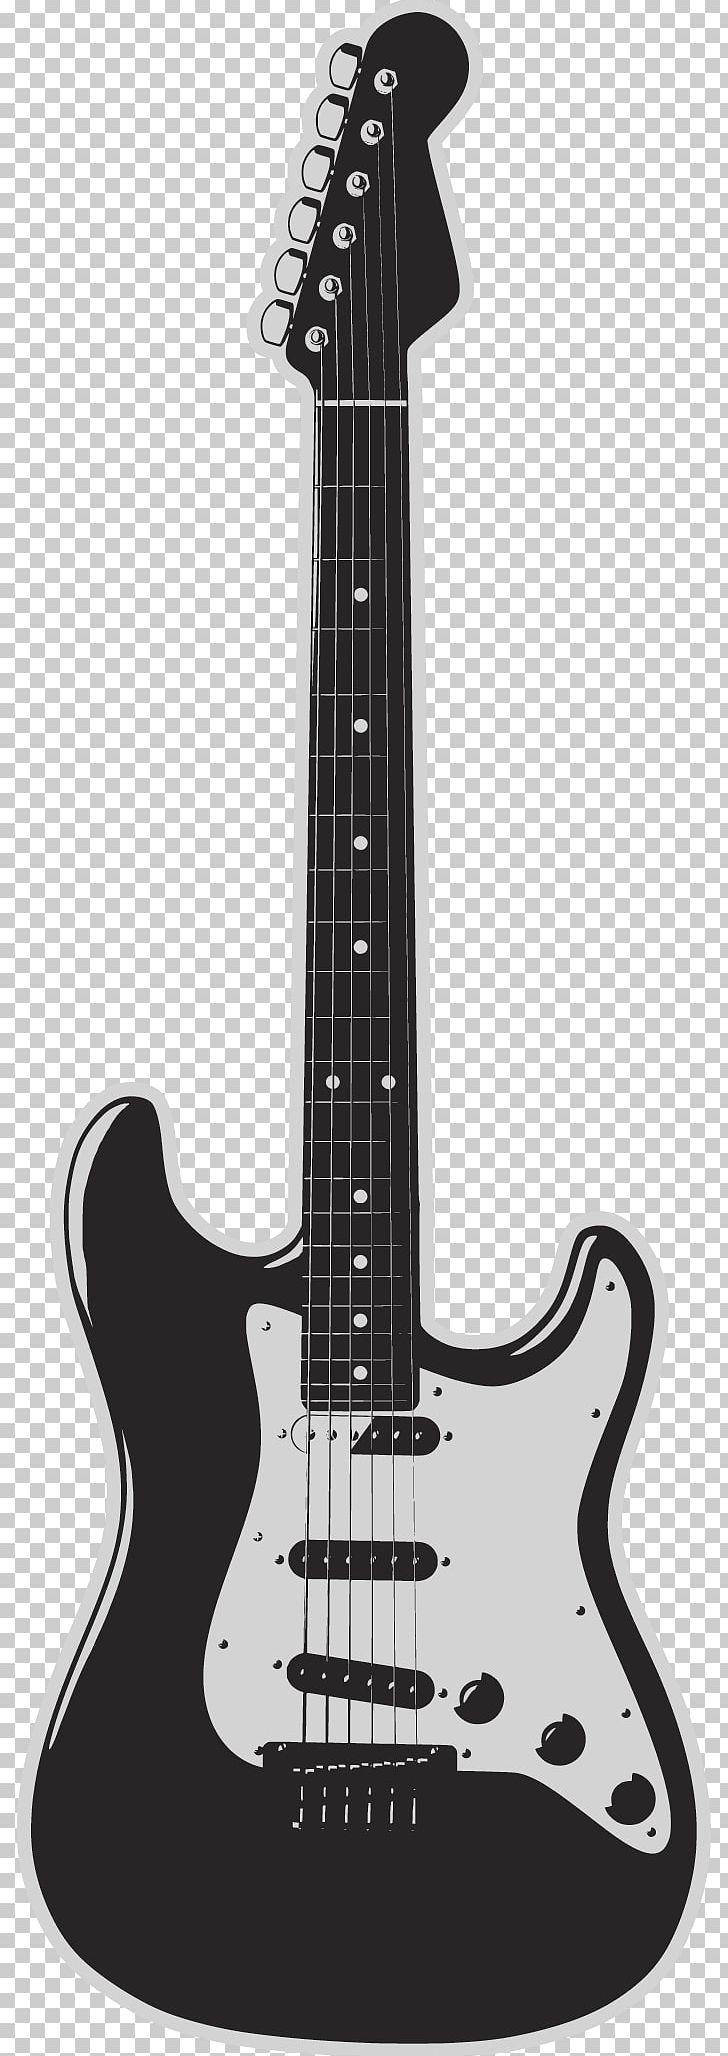 Rock Band Fender Stratocaster Musical Instrument Electric Guitar PNG, Clipart, Acoustic Electric Guitar, Band, Happy Birthday Vector Images, Monochrome, Musical Instruments Free PNG Download